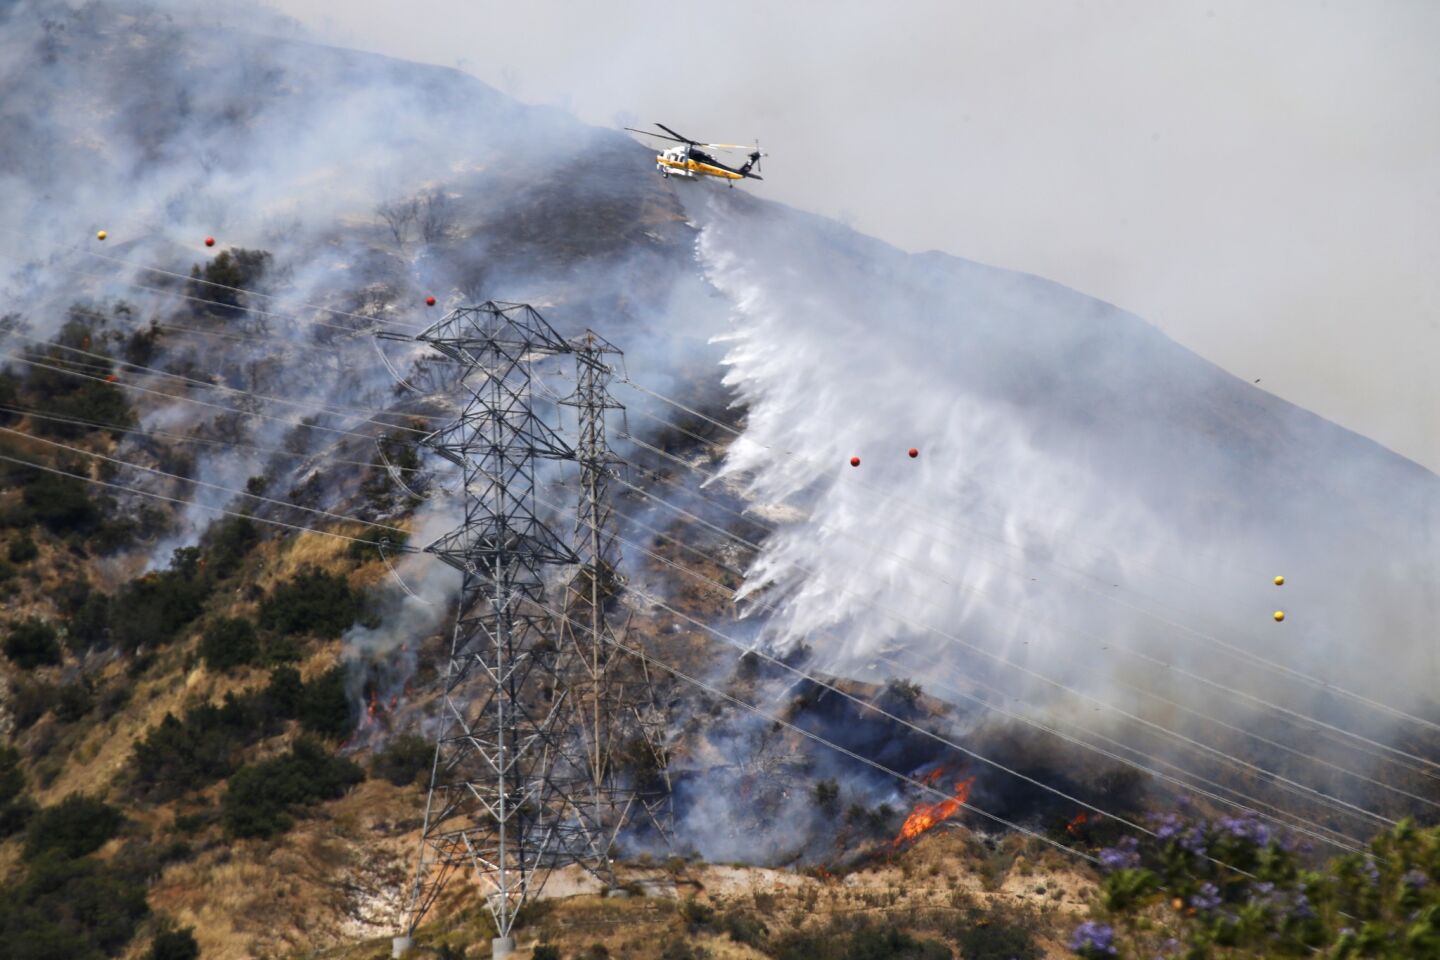 A fire-fighting helicopter drops water on the Duarte fire at 500 acres with 0% containment.